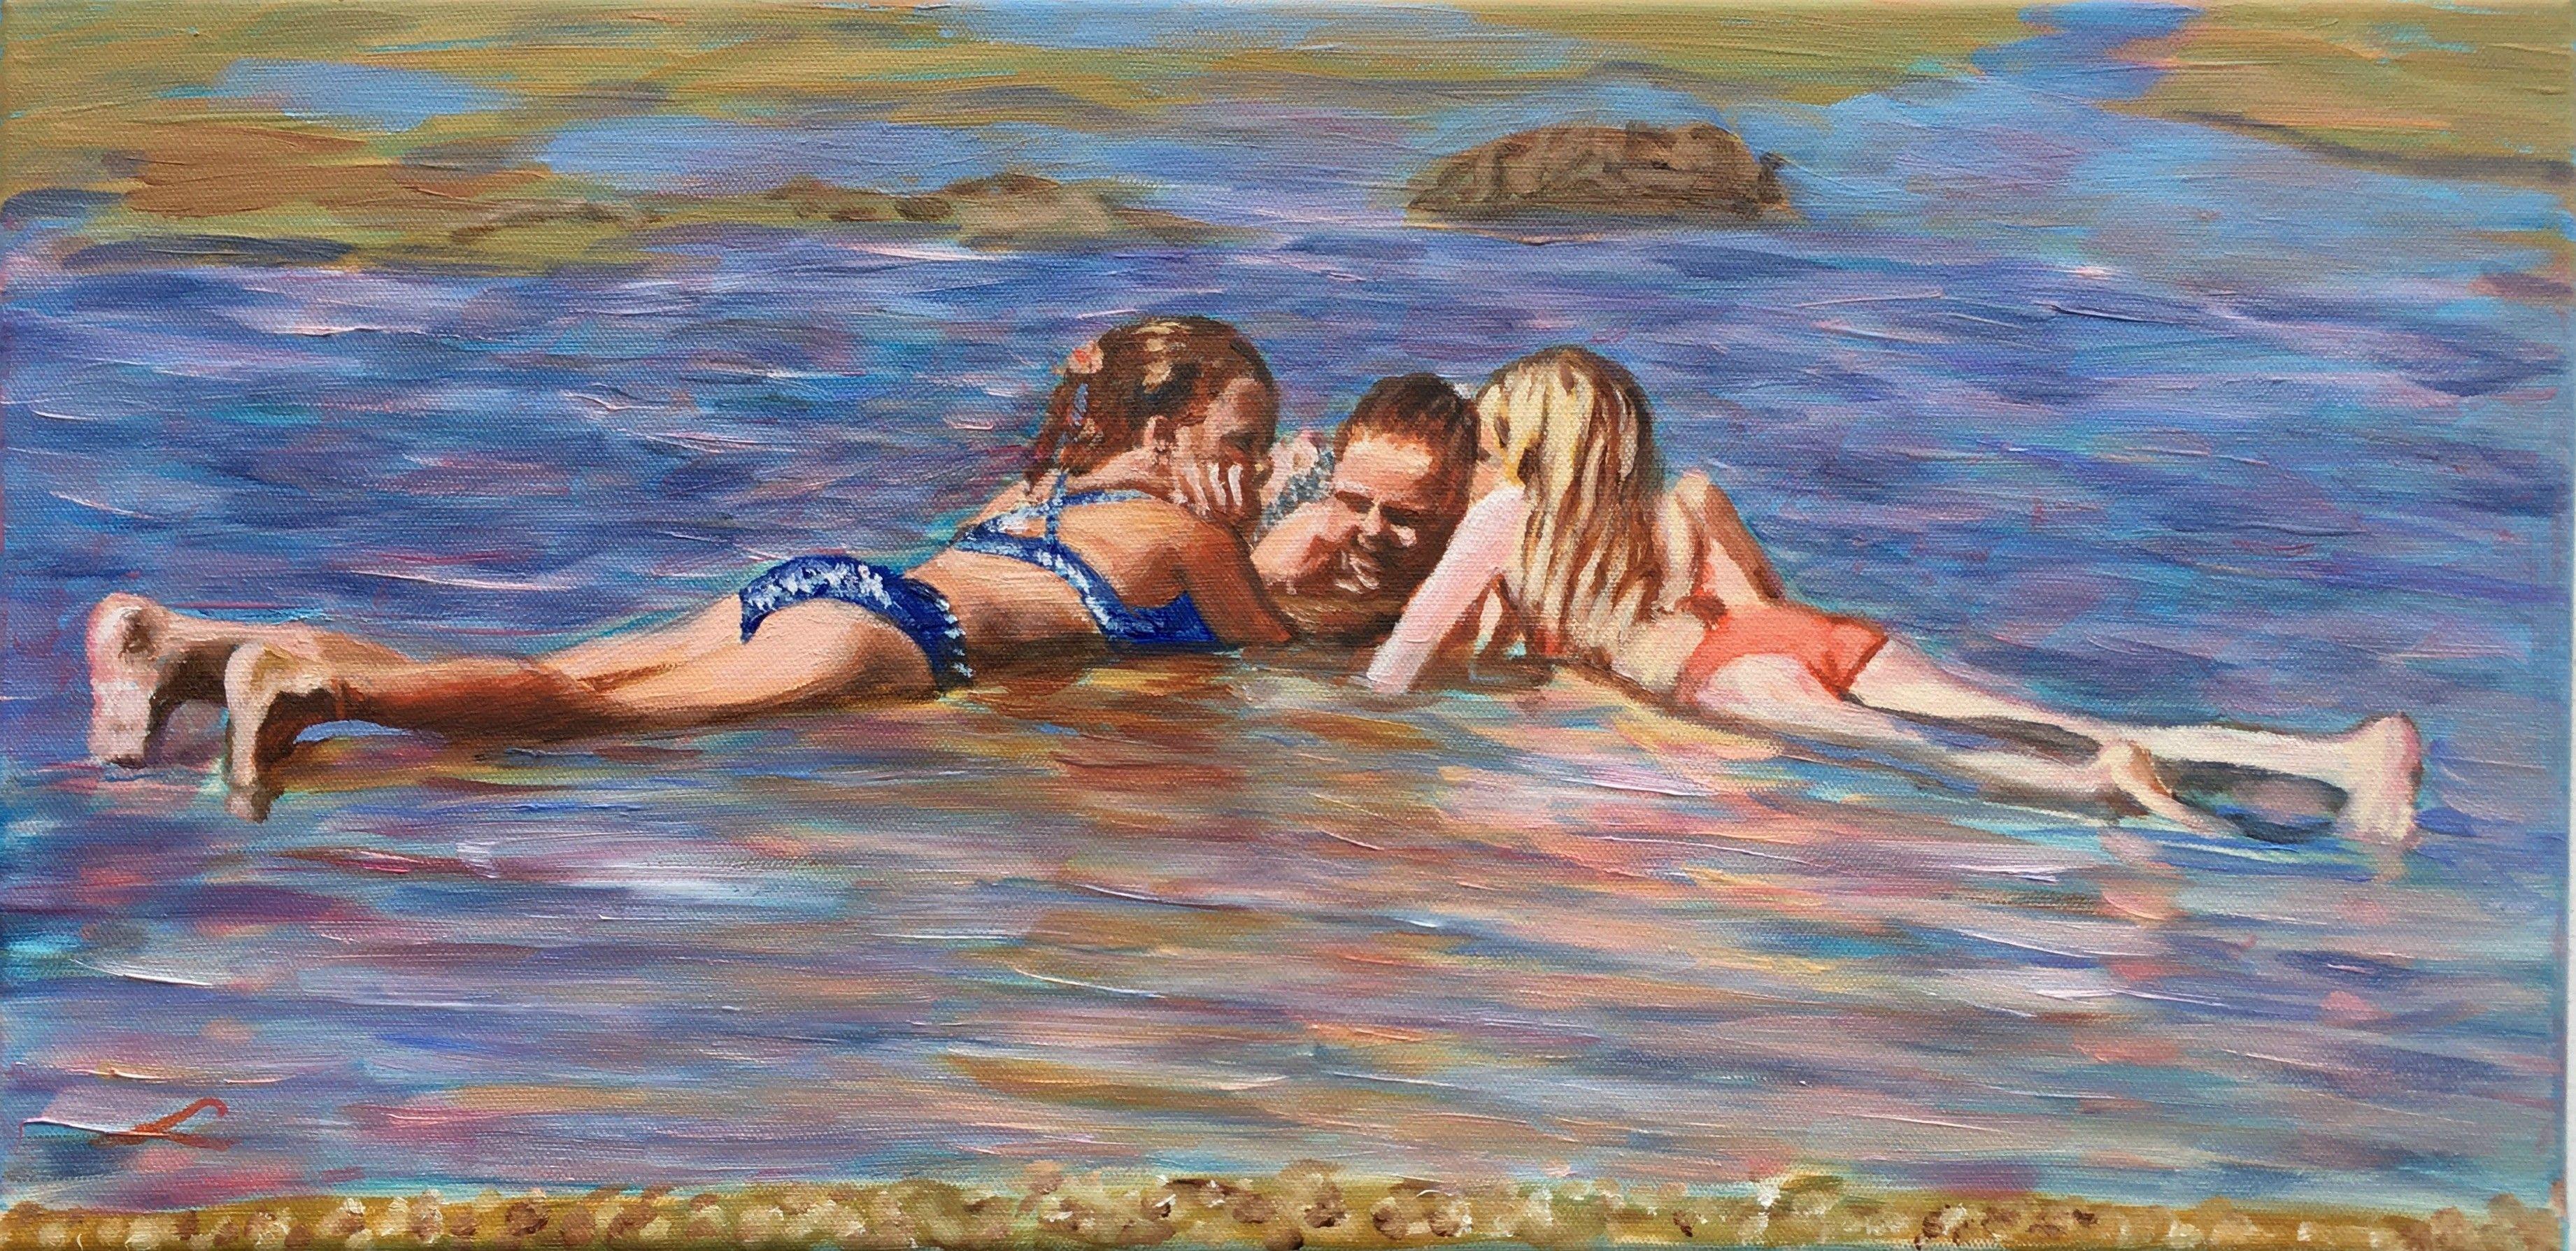 Three girls on the beach at a low tide. Alla prima oil painting with few final tuch when dry.A place that is peaceful in its own ways. It is the place to go to get away from all my troubles.  :: Painting :: Impressionist :: This piece comes with an